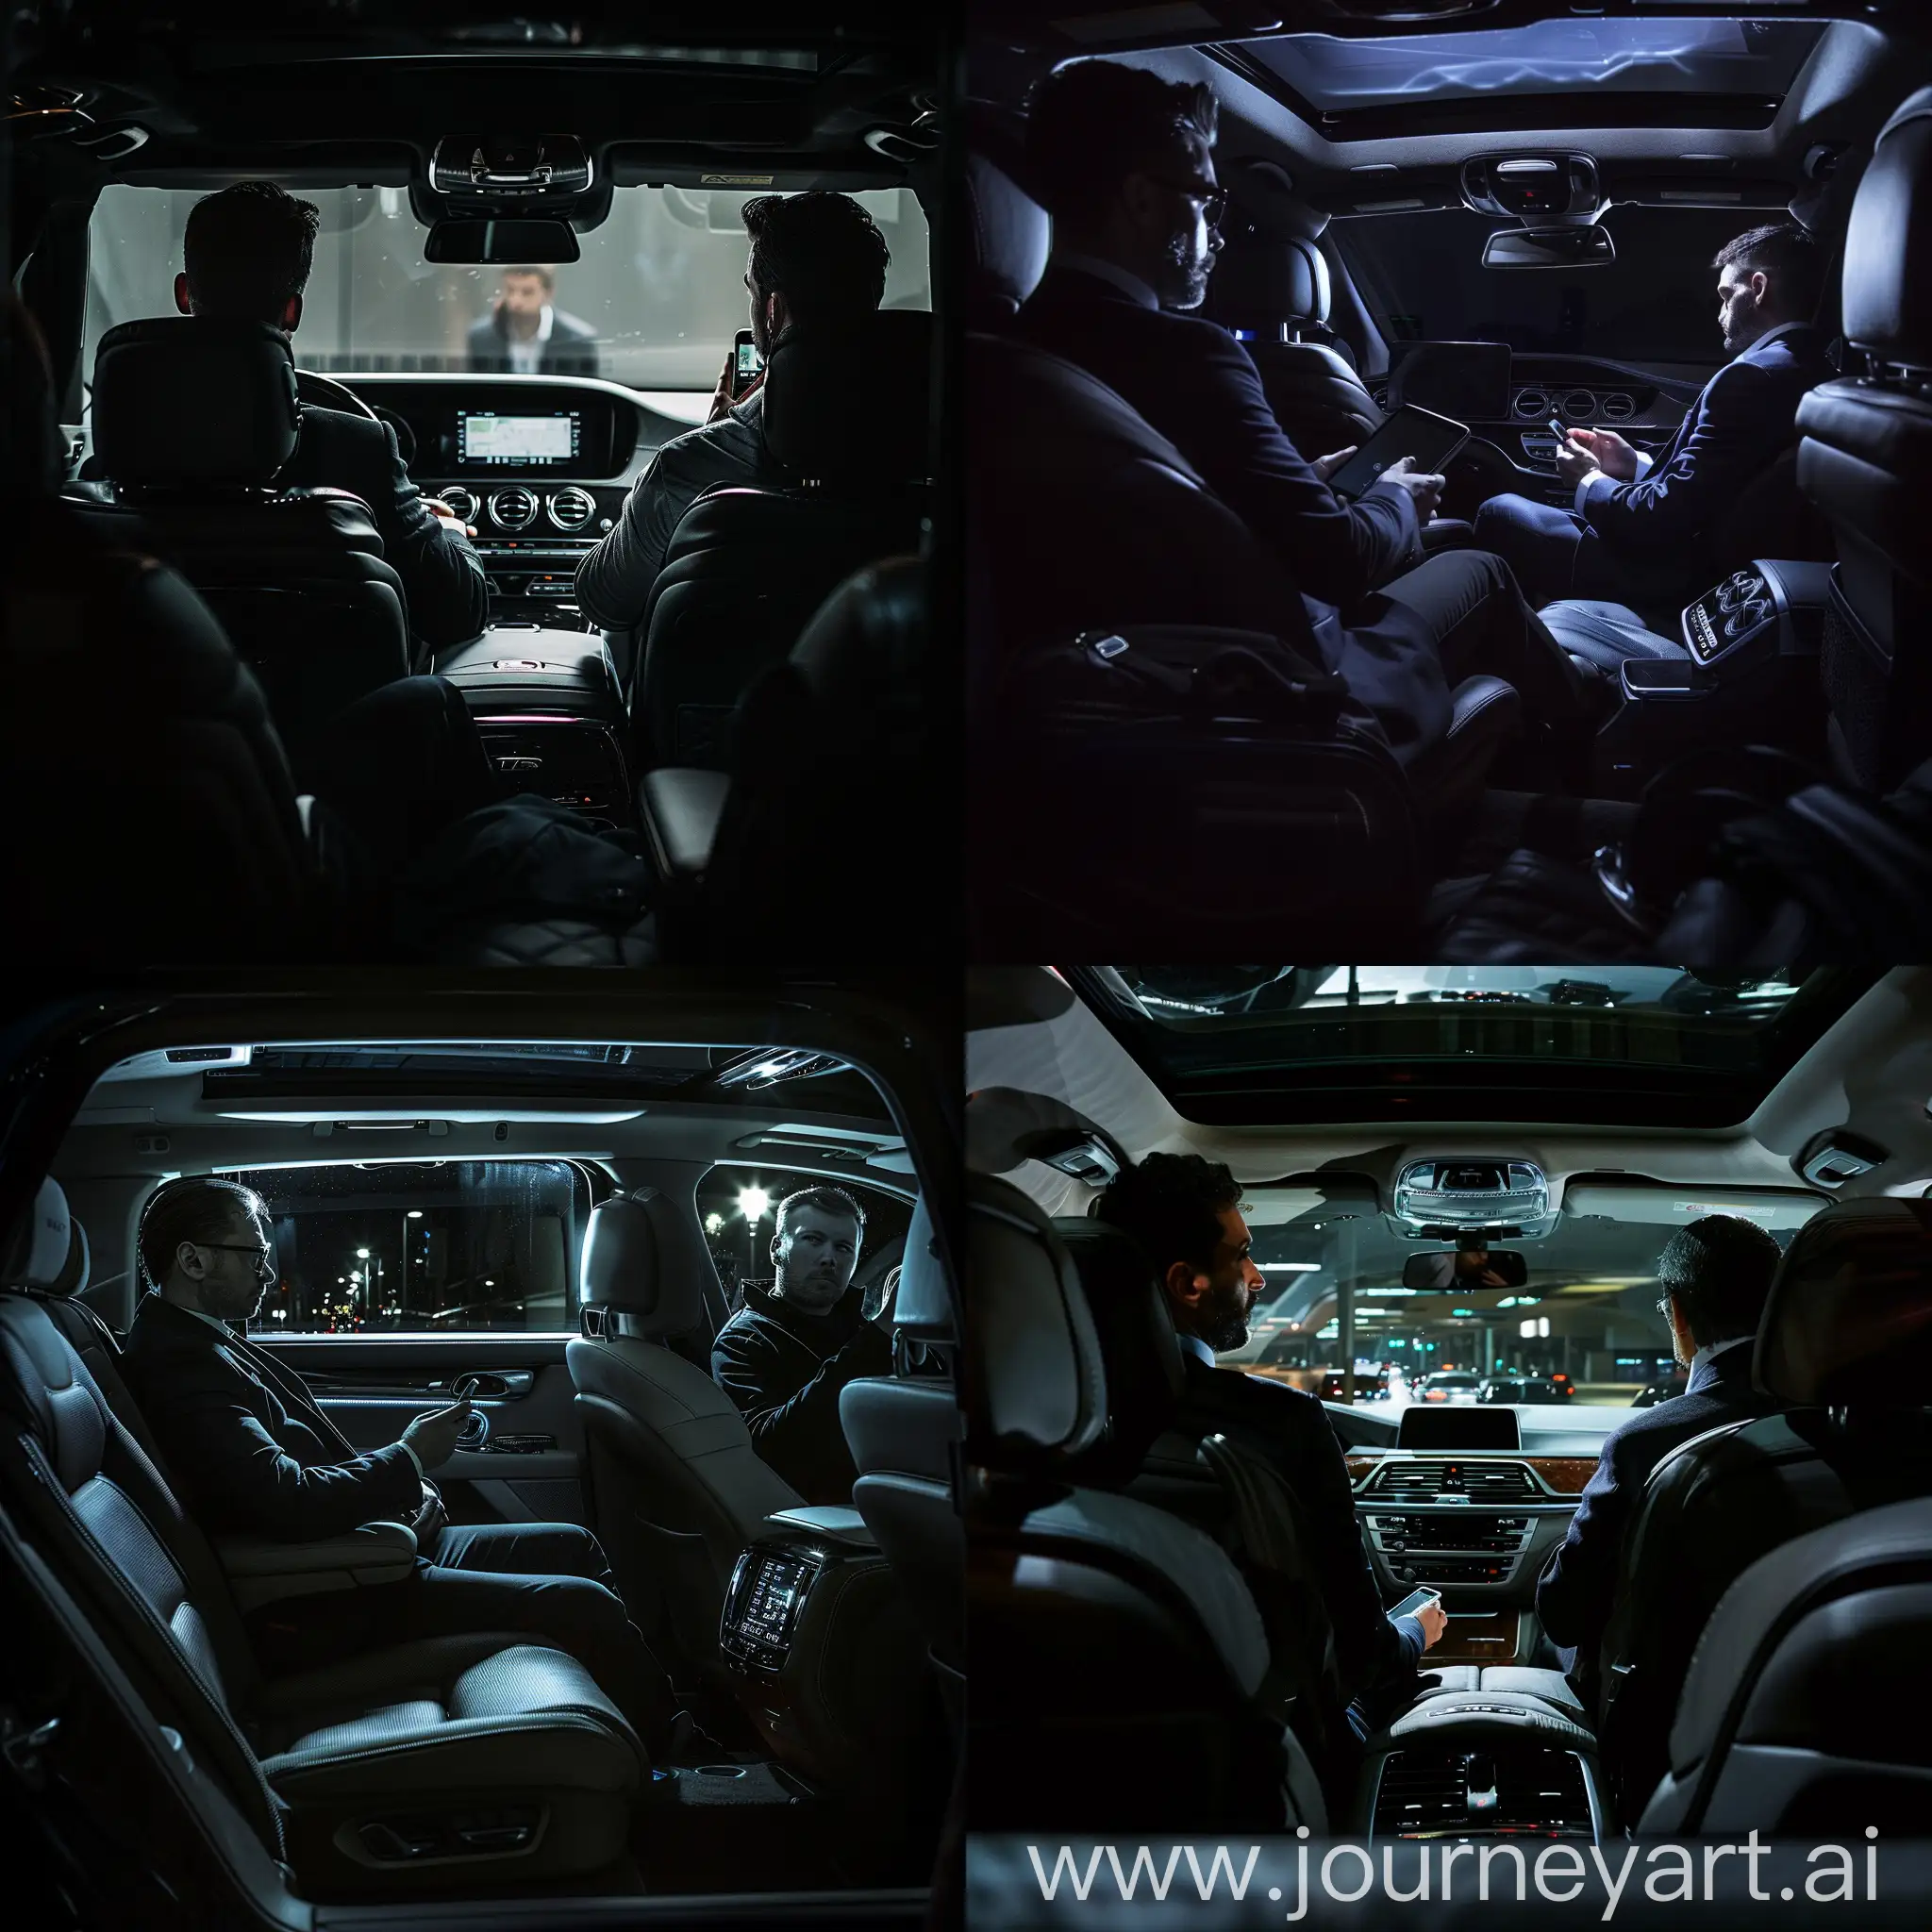 Luxury-Business-Car-Interior-with-Men-on-Phones